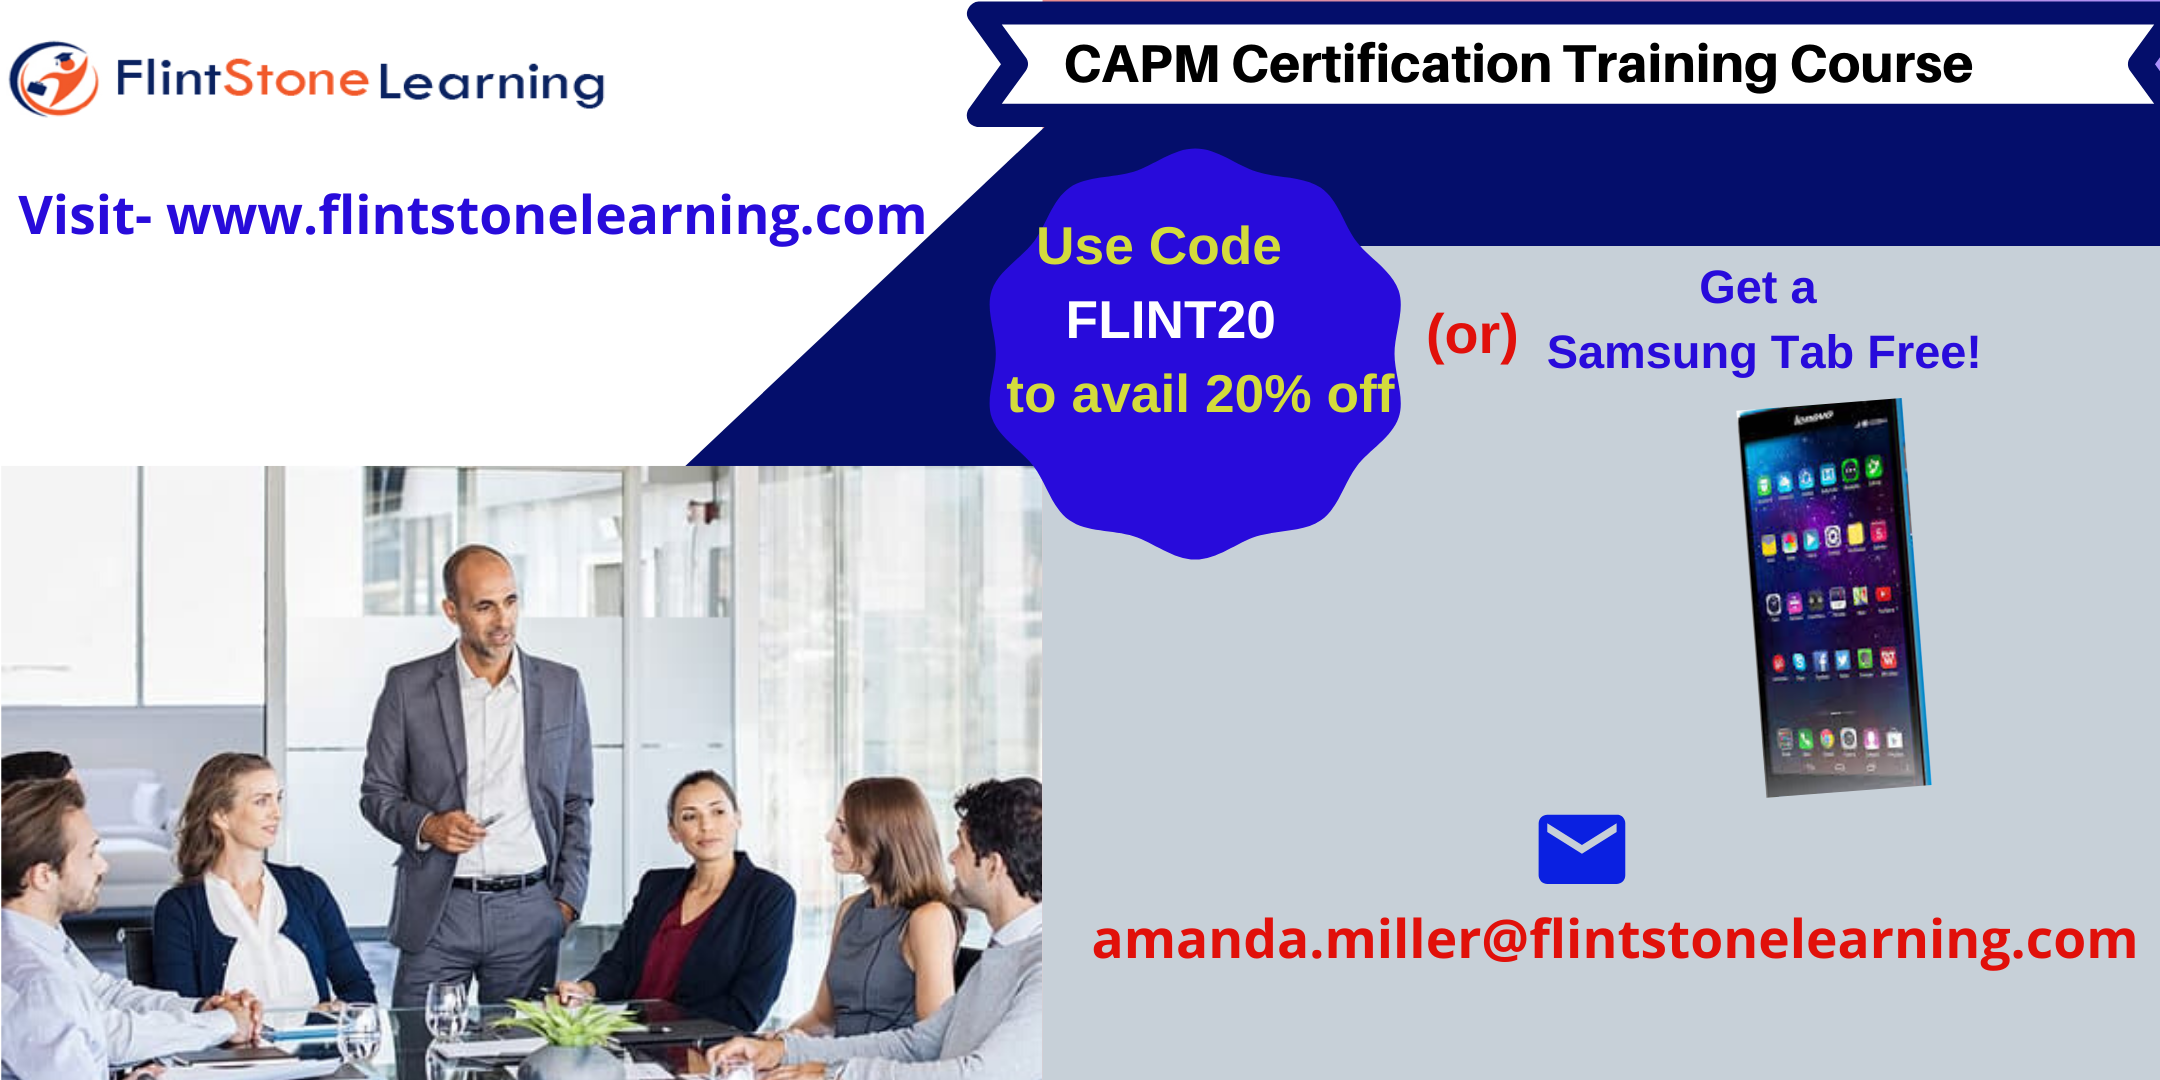 CAPM Certification Training Course in Parkersburg, WV